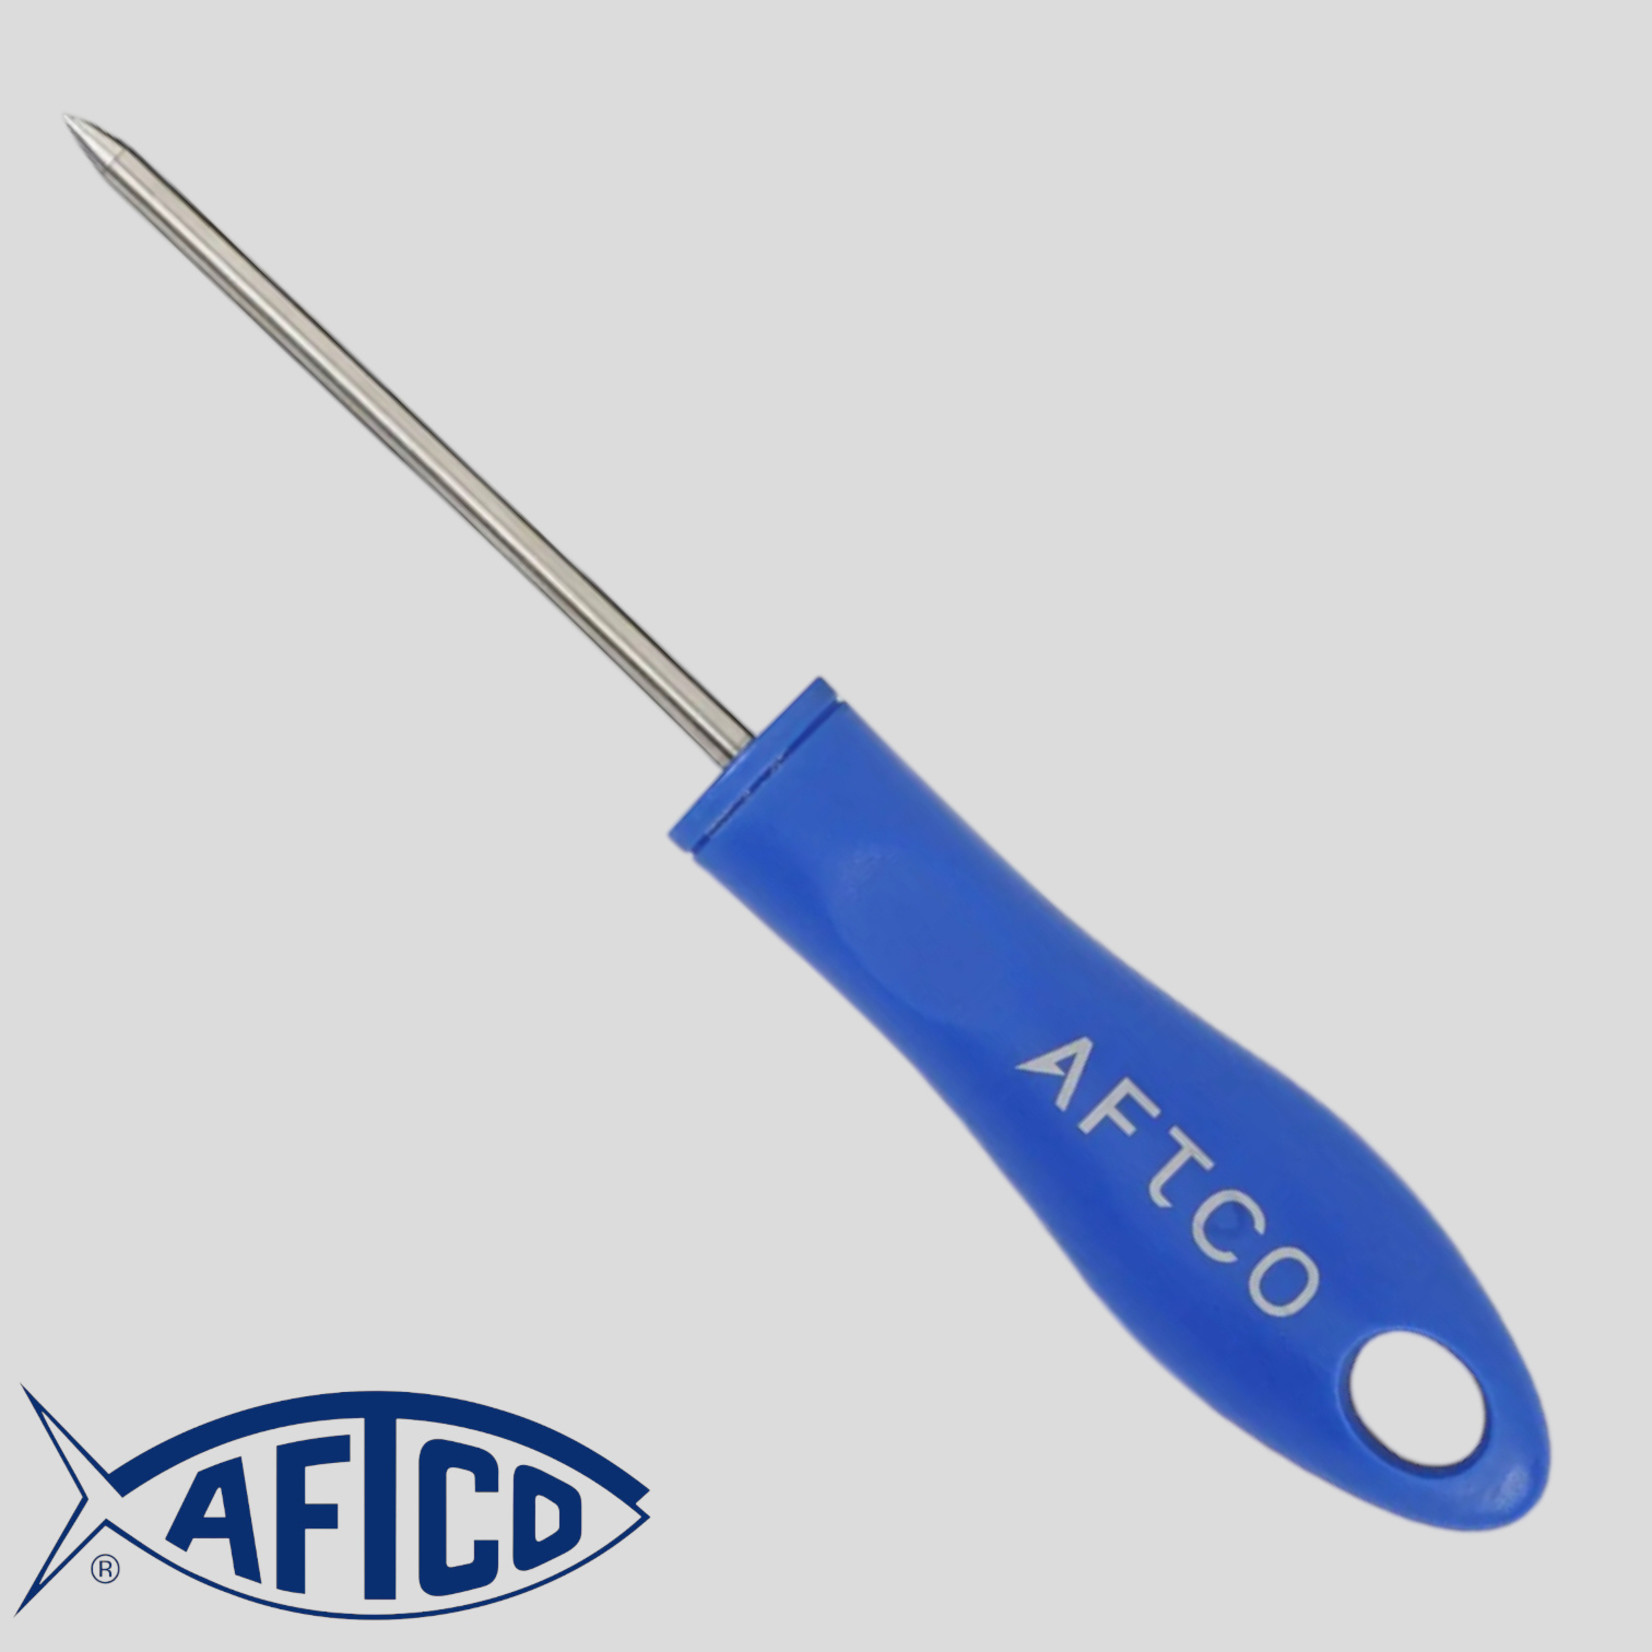 Aftco Aftco Fish Spike